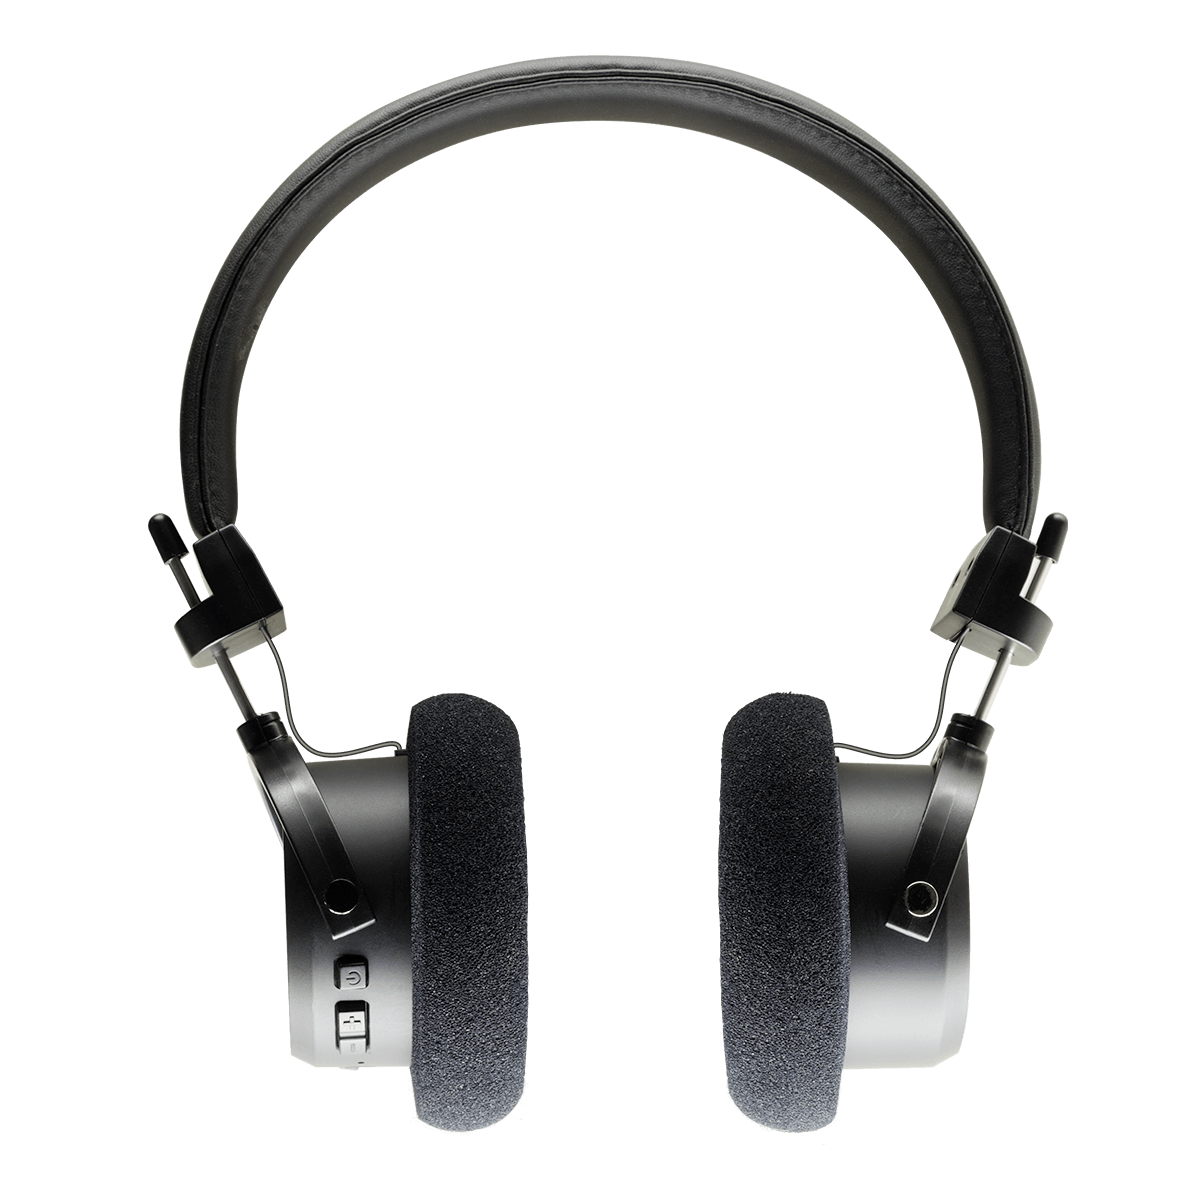 Front view photo of gw100 headphones on a white background